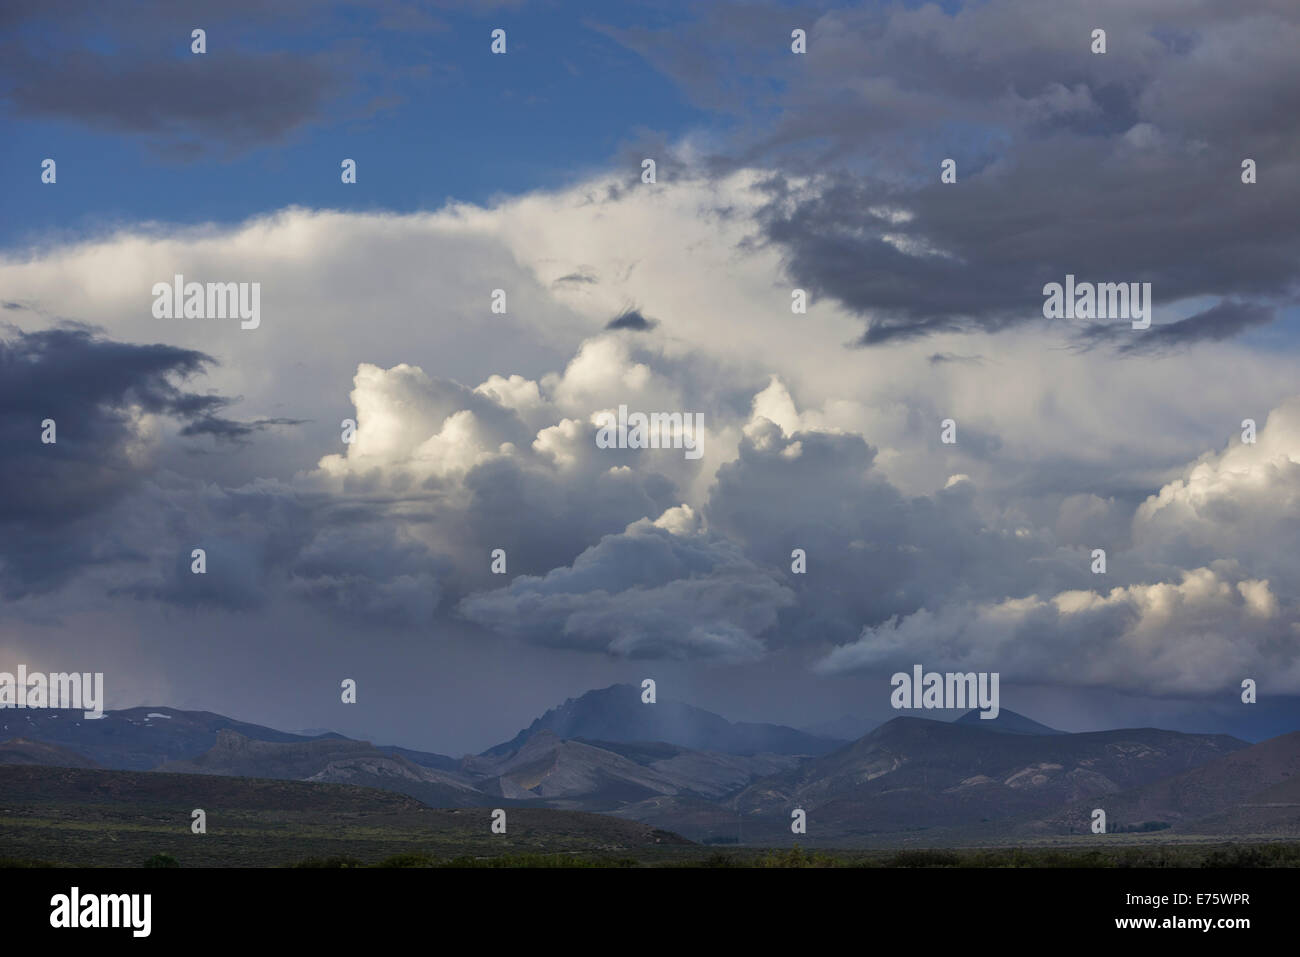 Rainy weather over the mountains in the evening, Mendoza province, Argentina Stock Photo